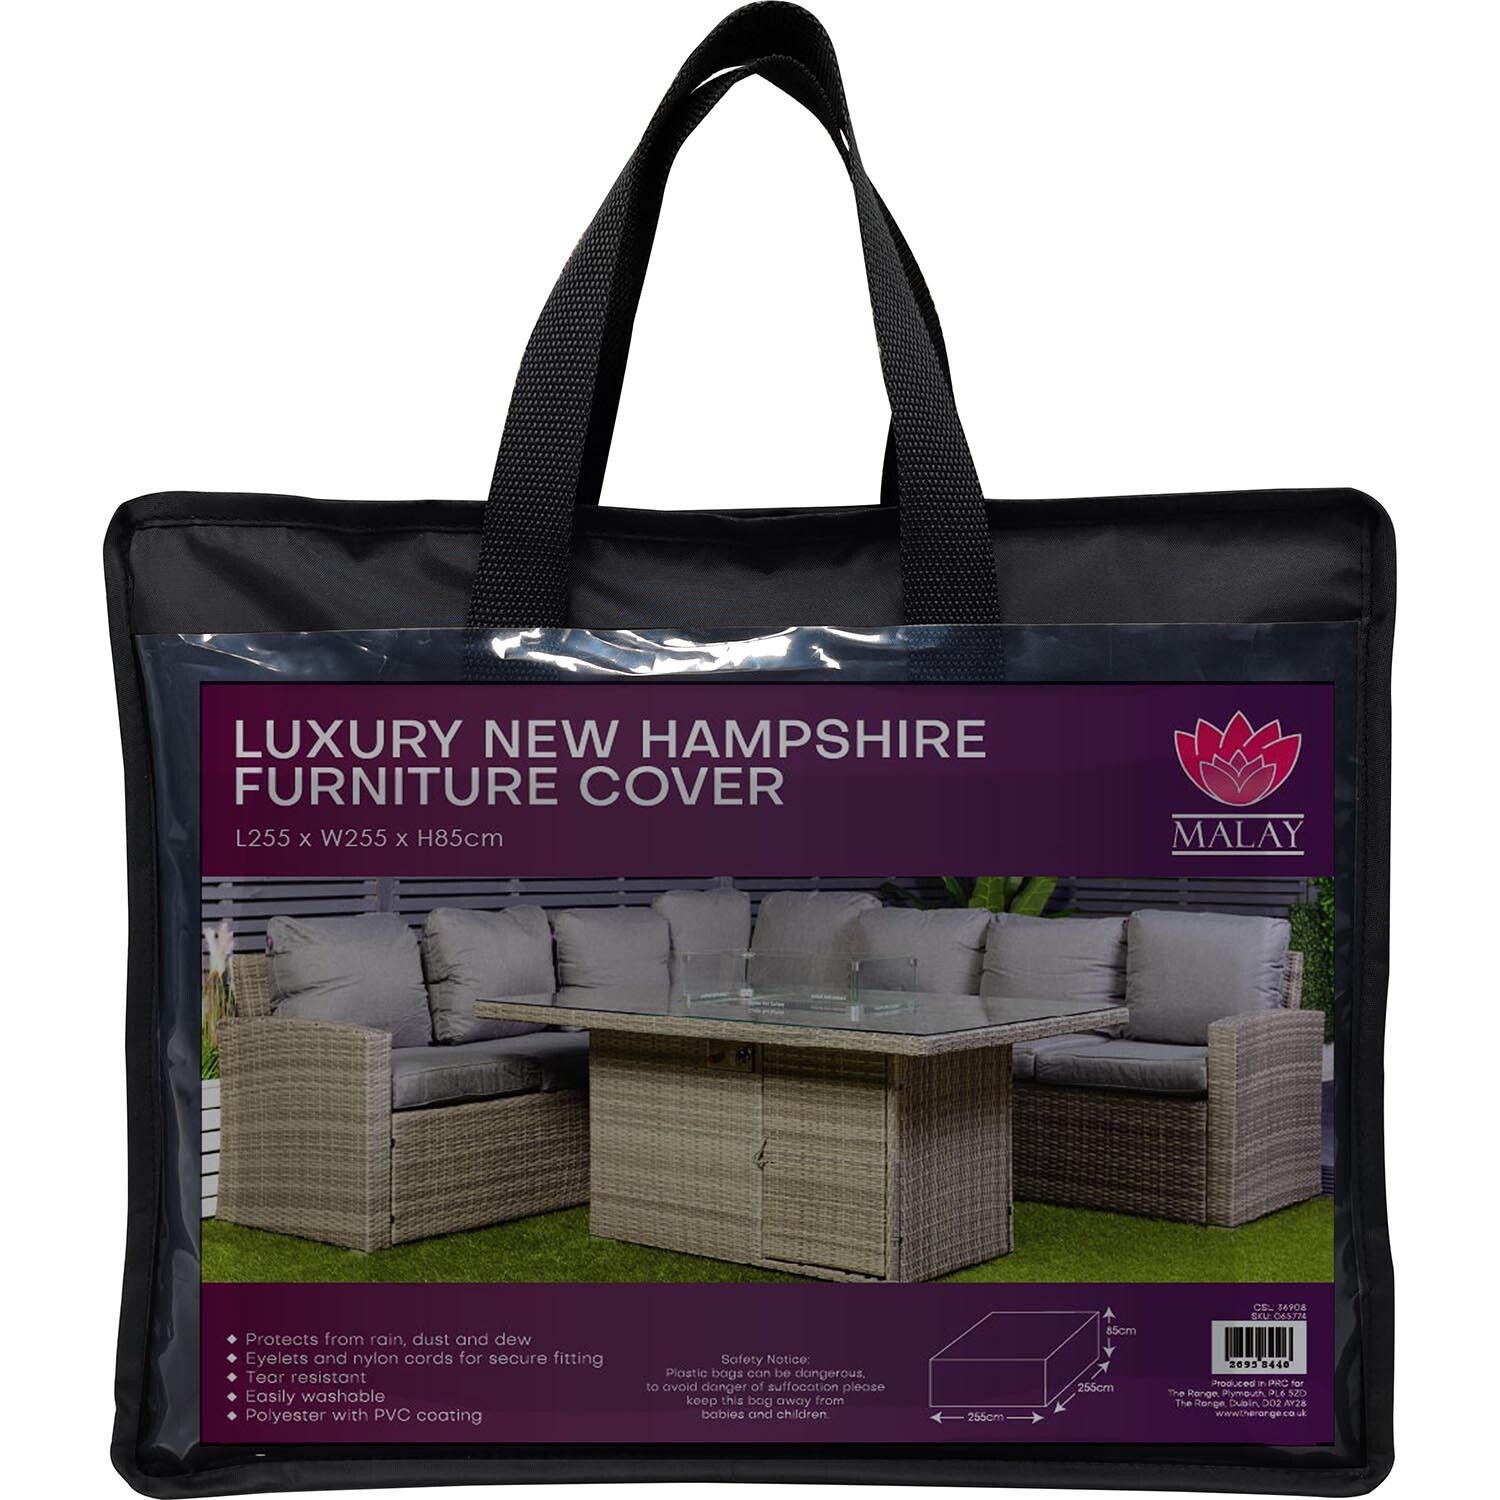 Malay Deluxe Malay Luxury New Hampshire Black Furniture Cover Image